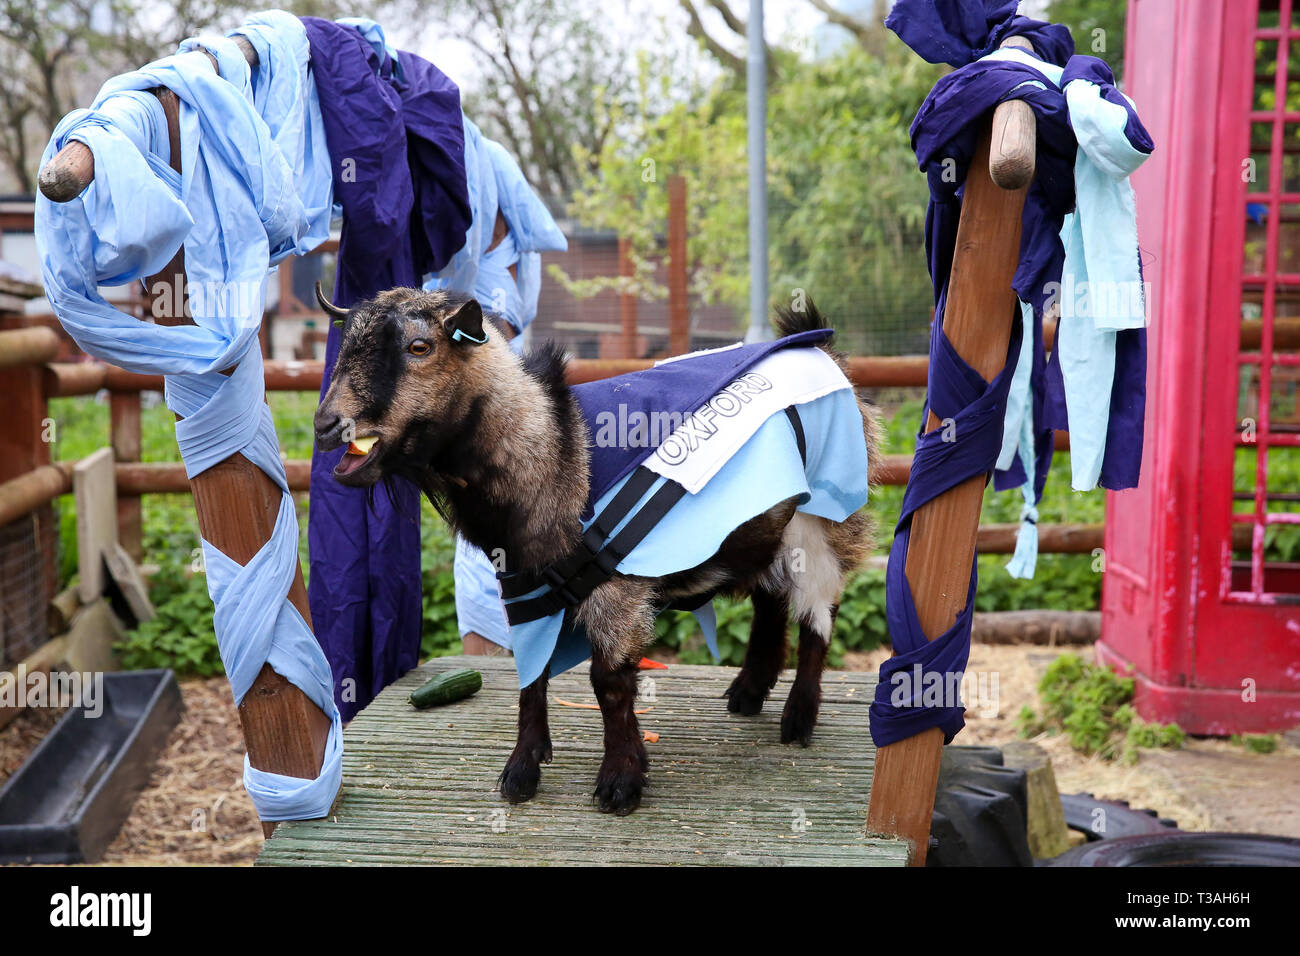 The winner Hamish representing Oxford is seen on the podium after the Oxford vs Cambridge Goat Race in East London. Two pygmy goats compete during the 10th Oxford and Cambridge Goat Race at Spitalfields City Farm, Bethnal Green in East London. The annual fundraising event, which takes place at the same time as the Oxford and Cambridge boat race, where two goats, one named Hamish representing Oxford and the other Hugo representing Cambridge to be crowned King Billy. Stock Photo